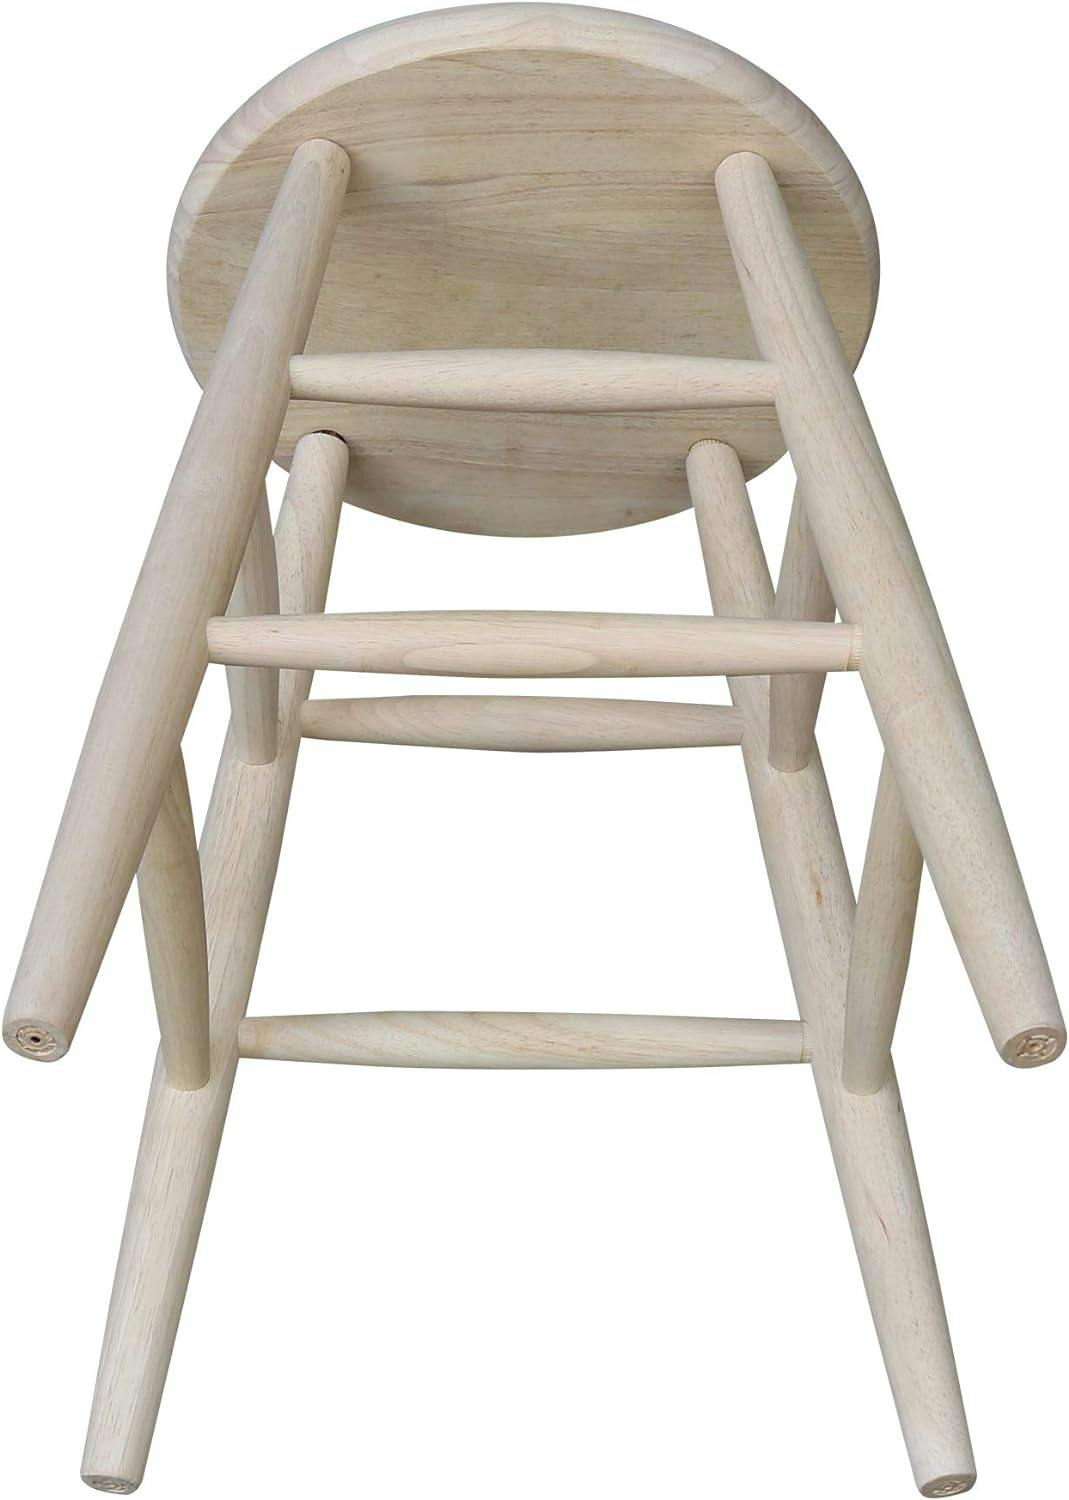 Traditional Solid Hardwood Unfinished Counter Height Stool